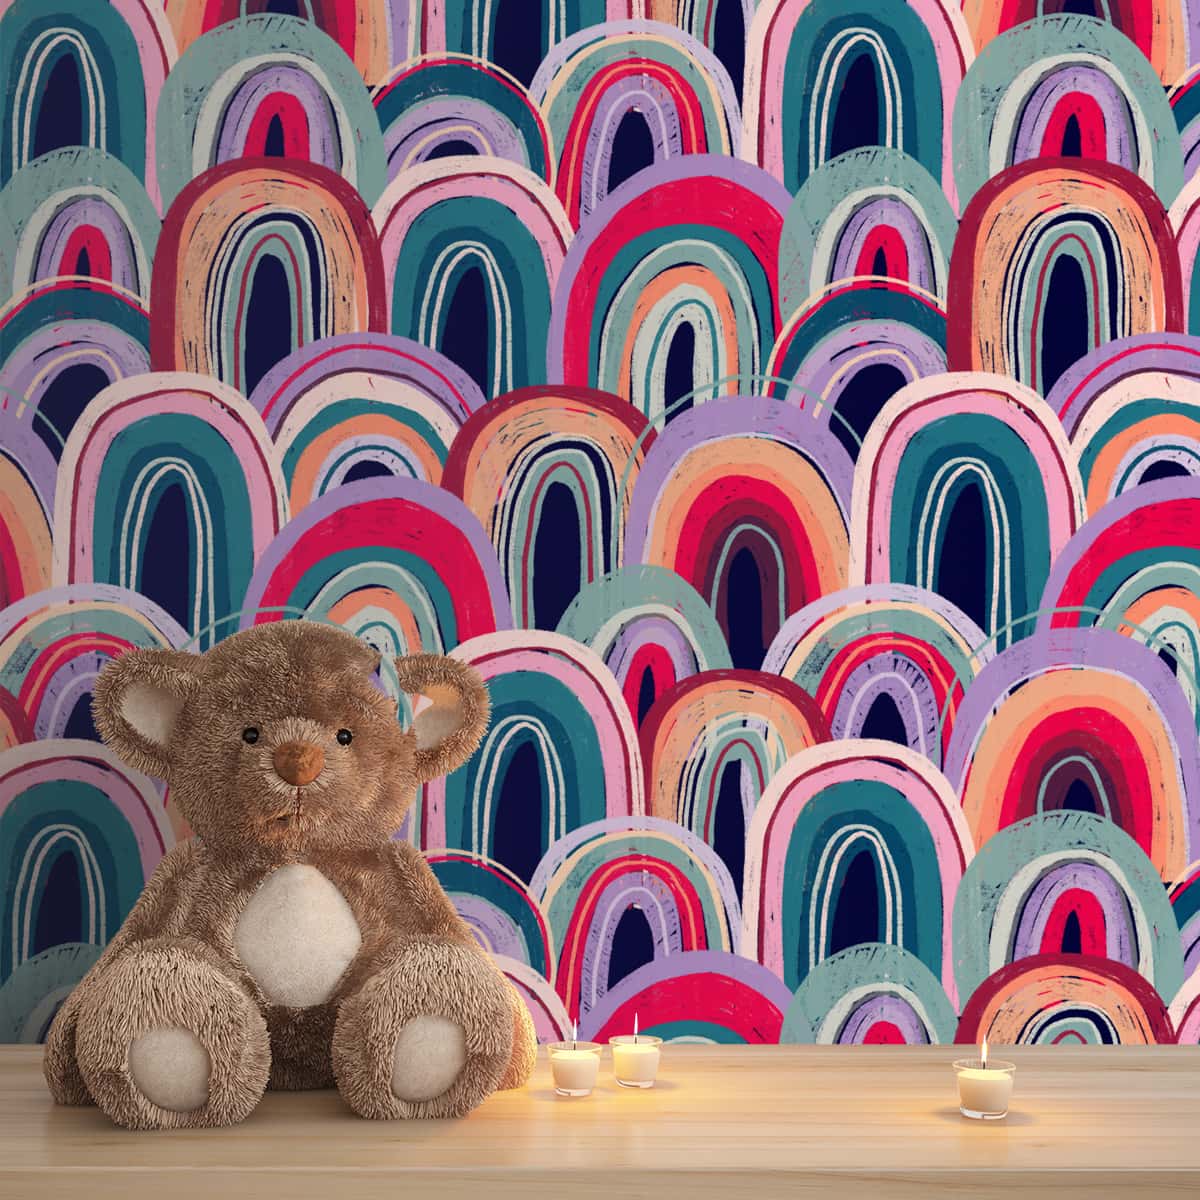 Vibrant and Colorful Kids Room Wallpaper